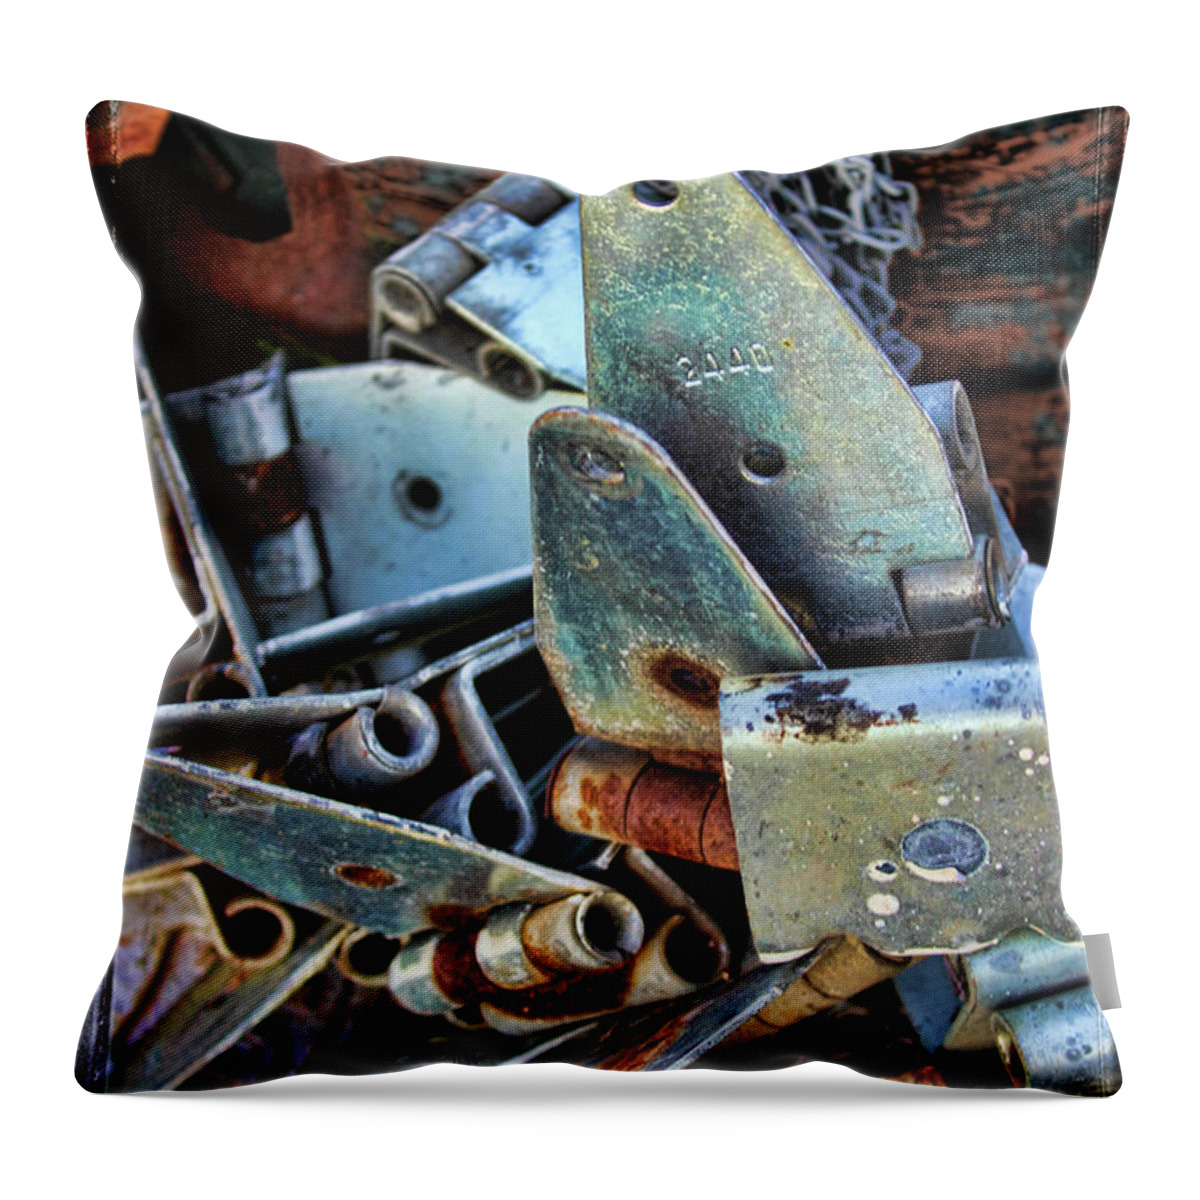 Hinge Throw Pillow featuring the photograph Hinges by Sylvia Thornton